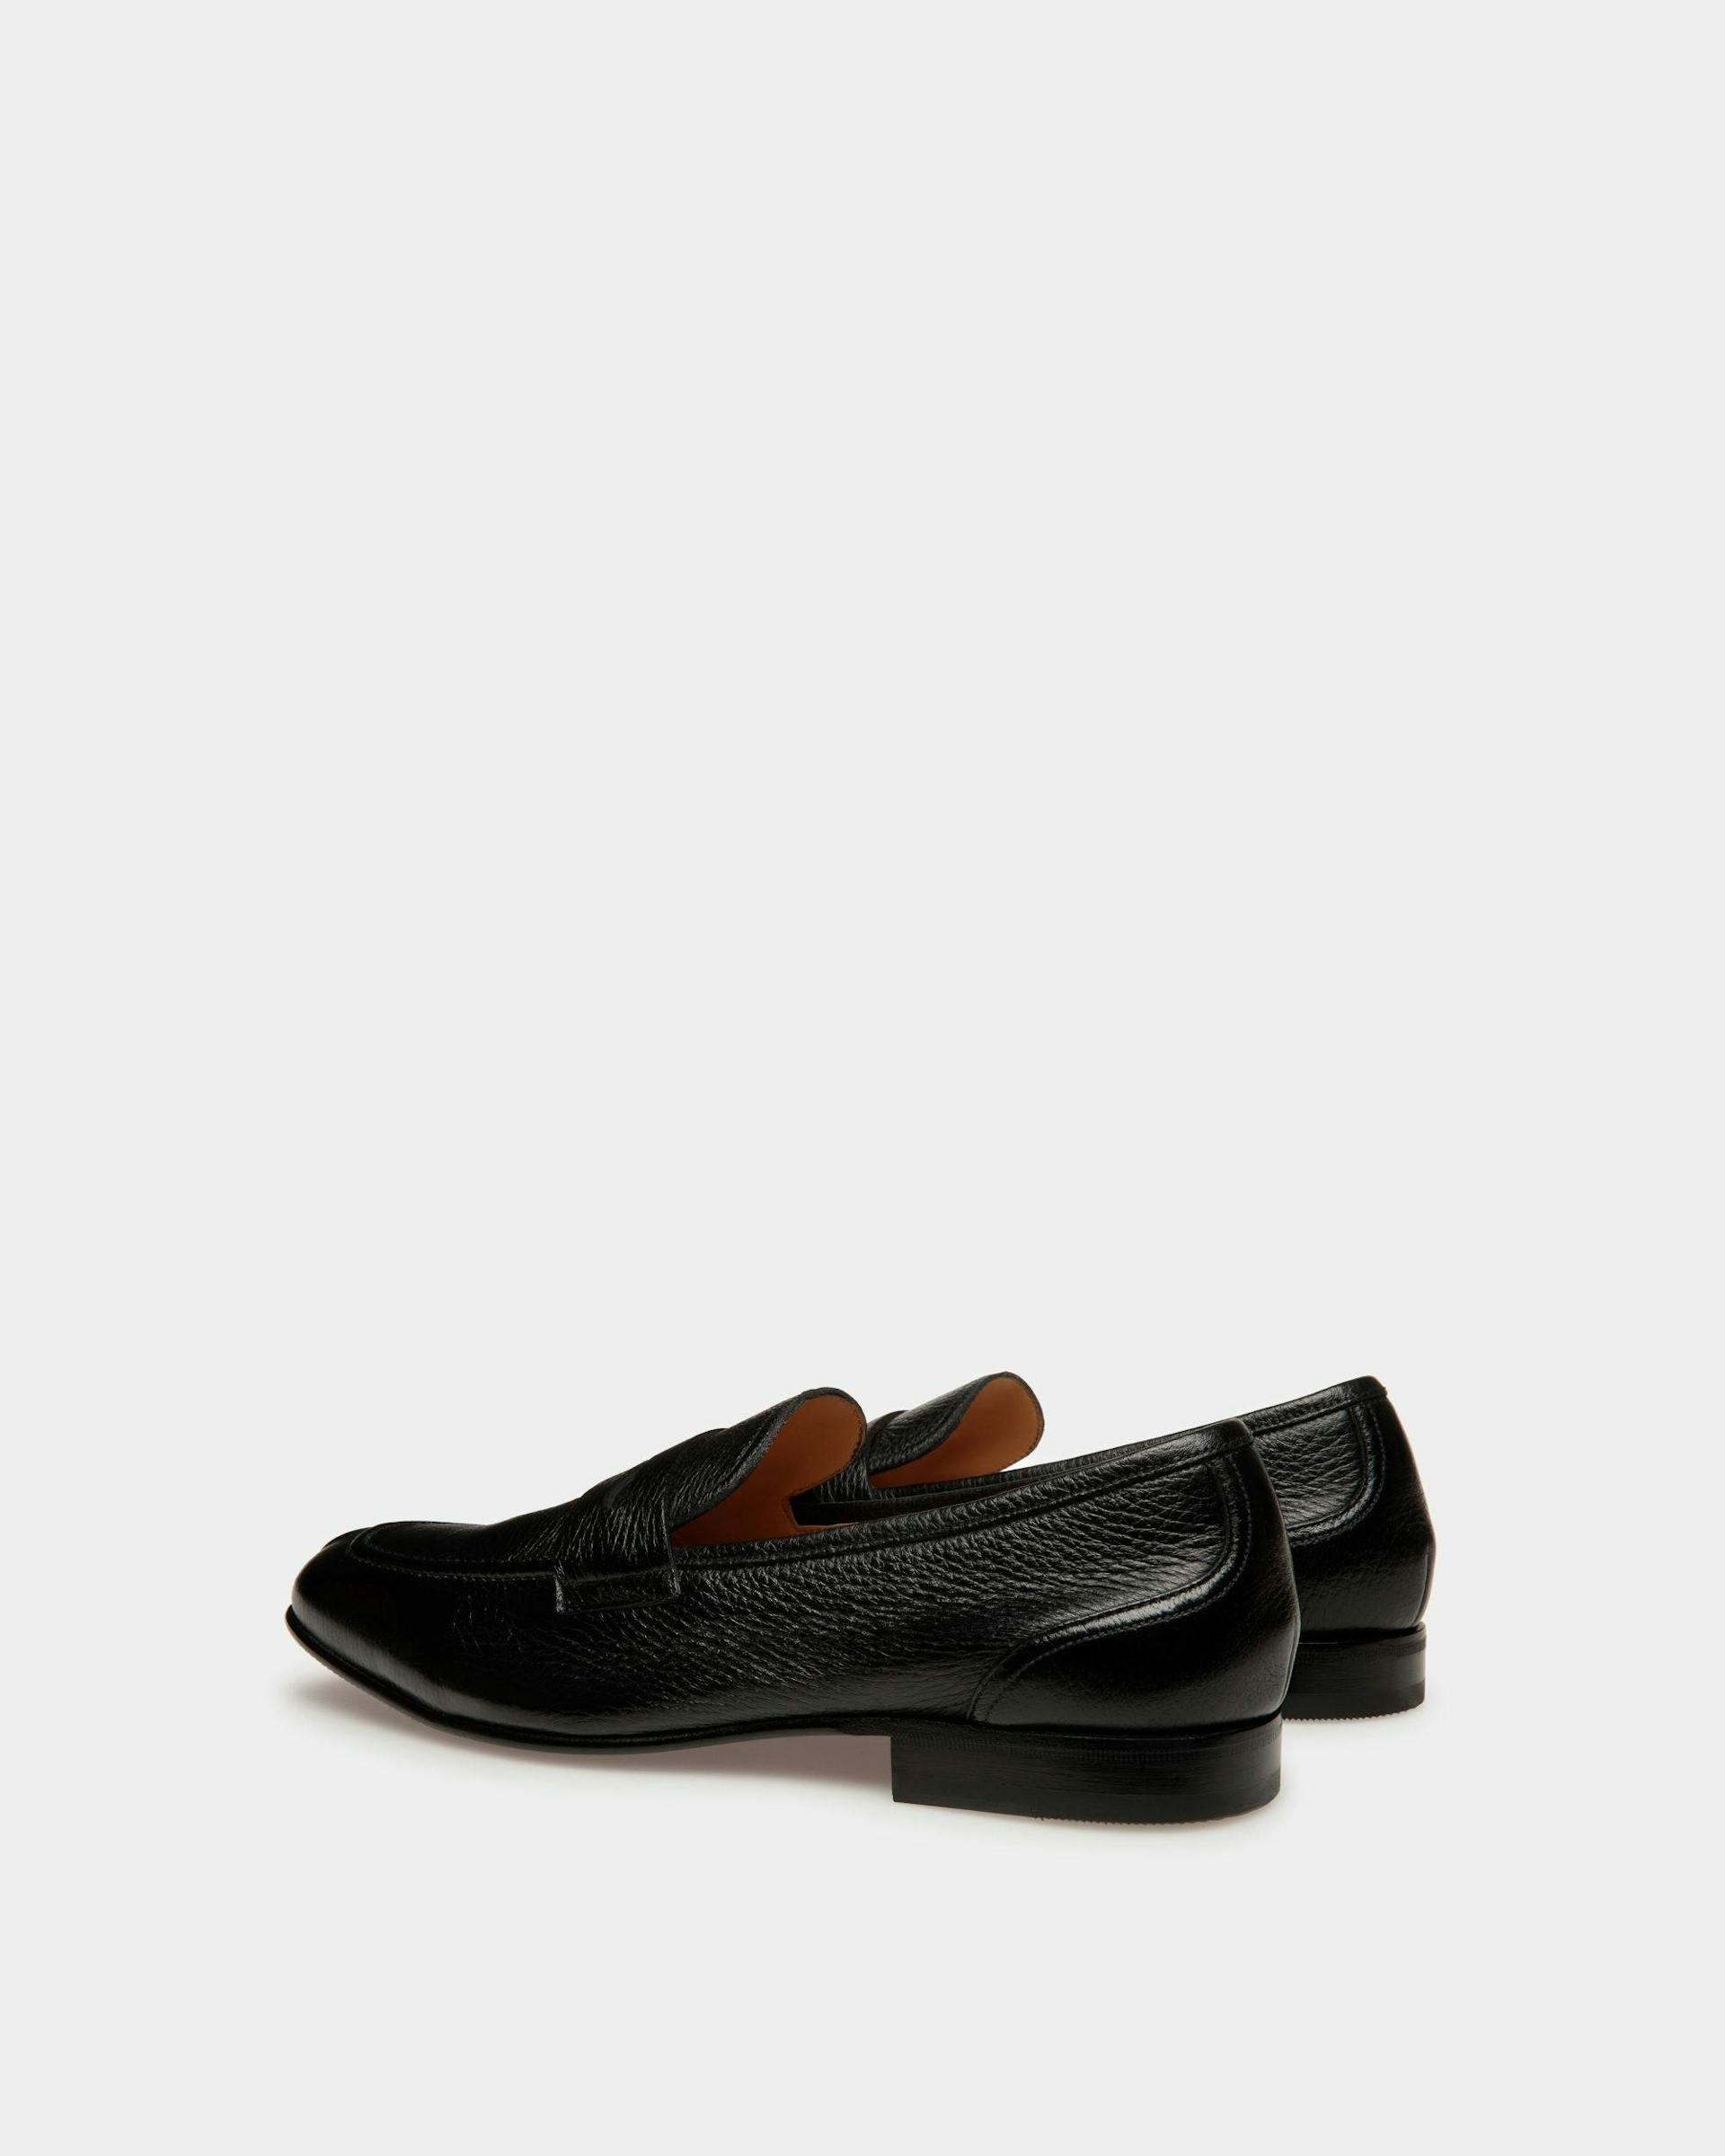 Men's Suisse Loafers In Black Leather | Bally | Still Life 3/4 Back